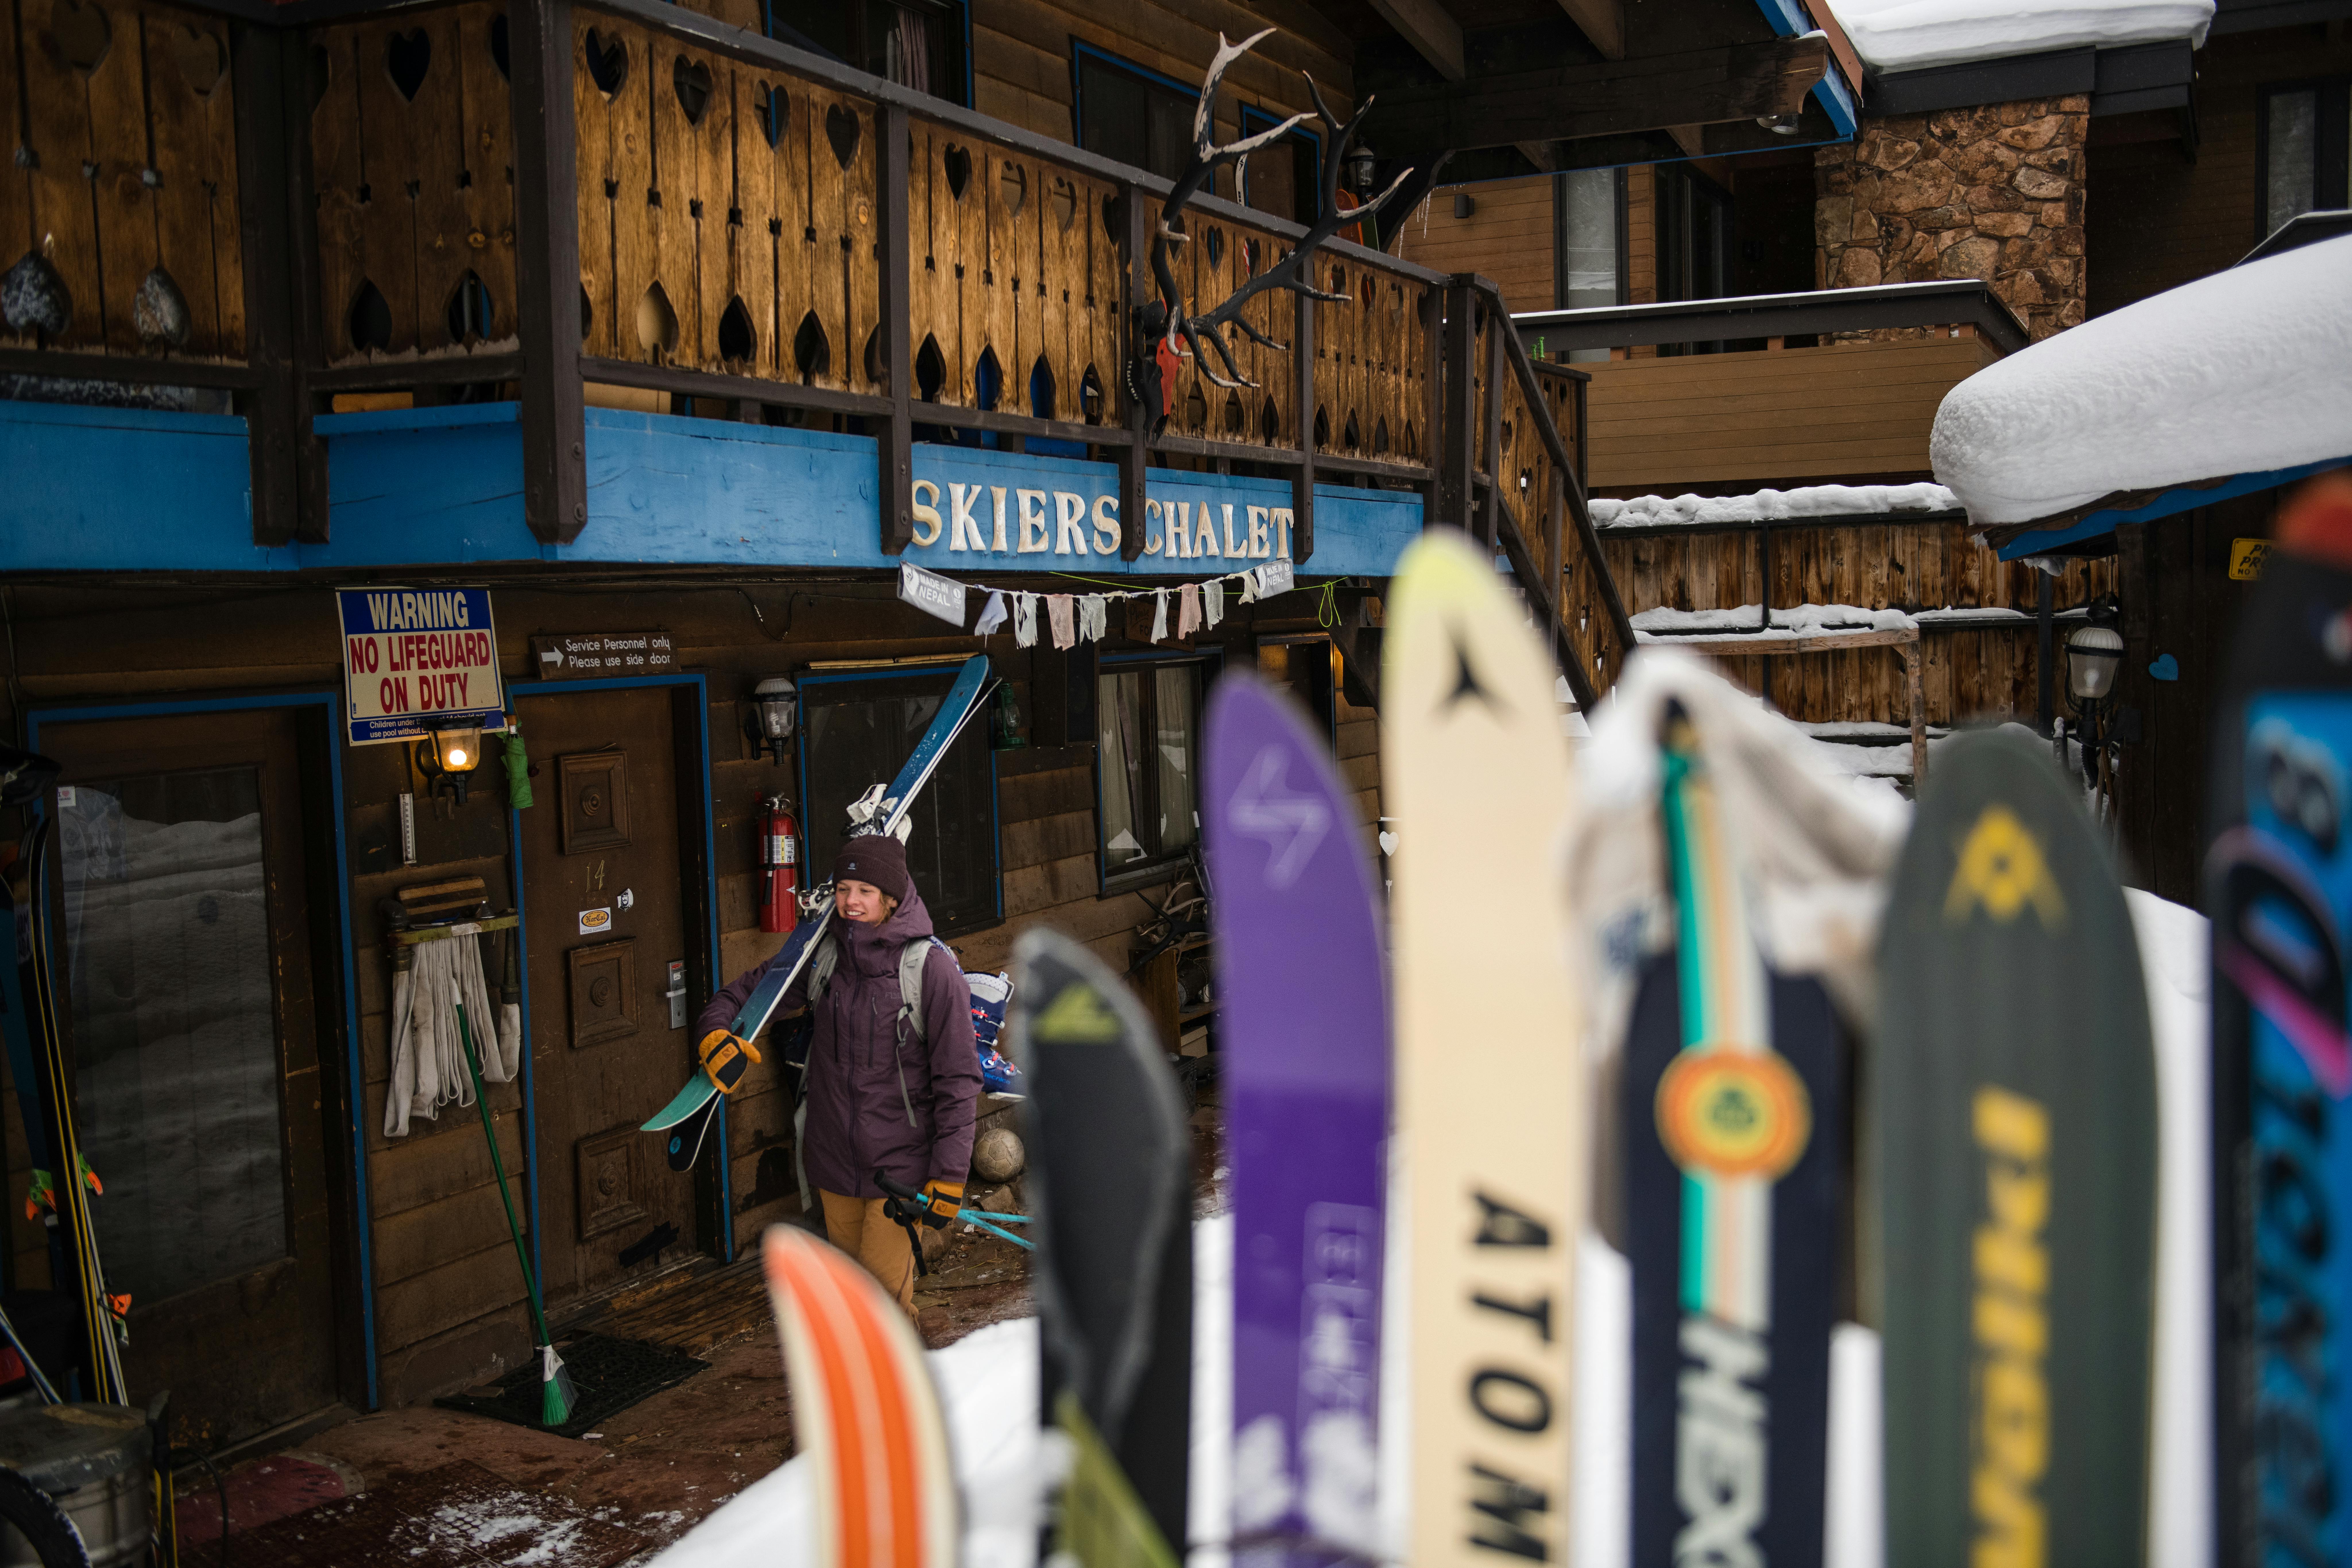 A woman walking carrying skis in a ski town